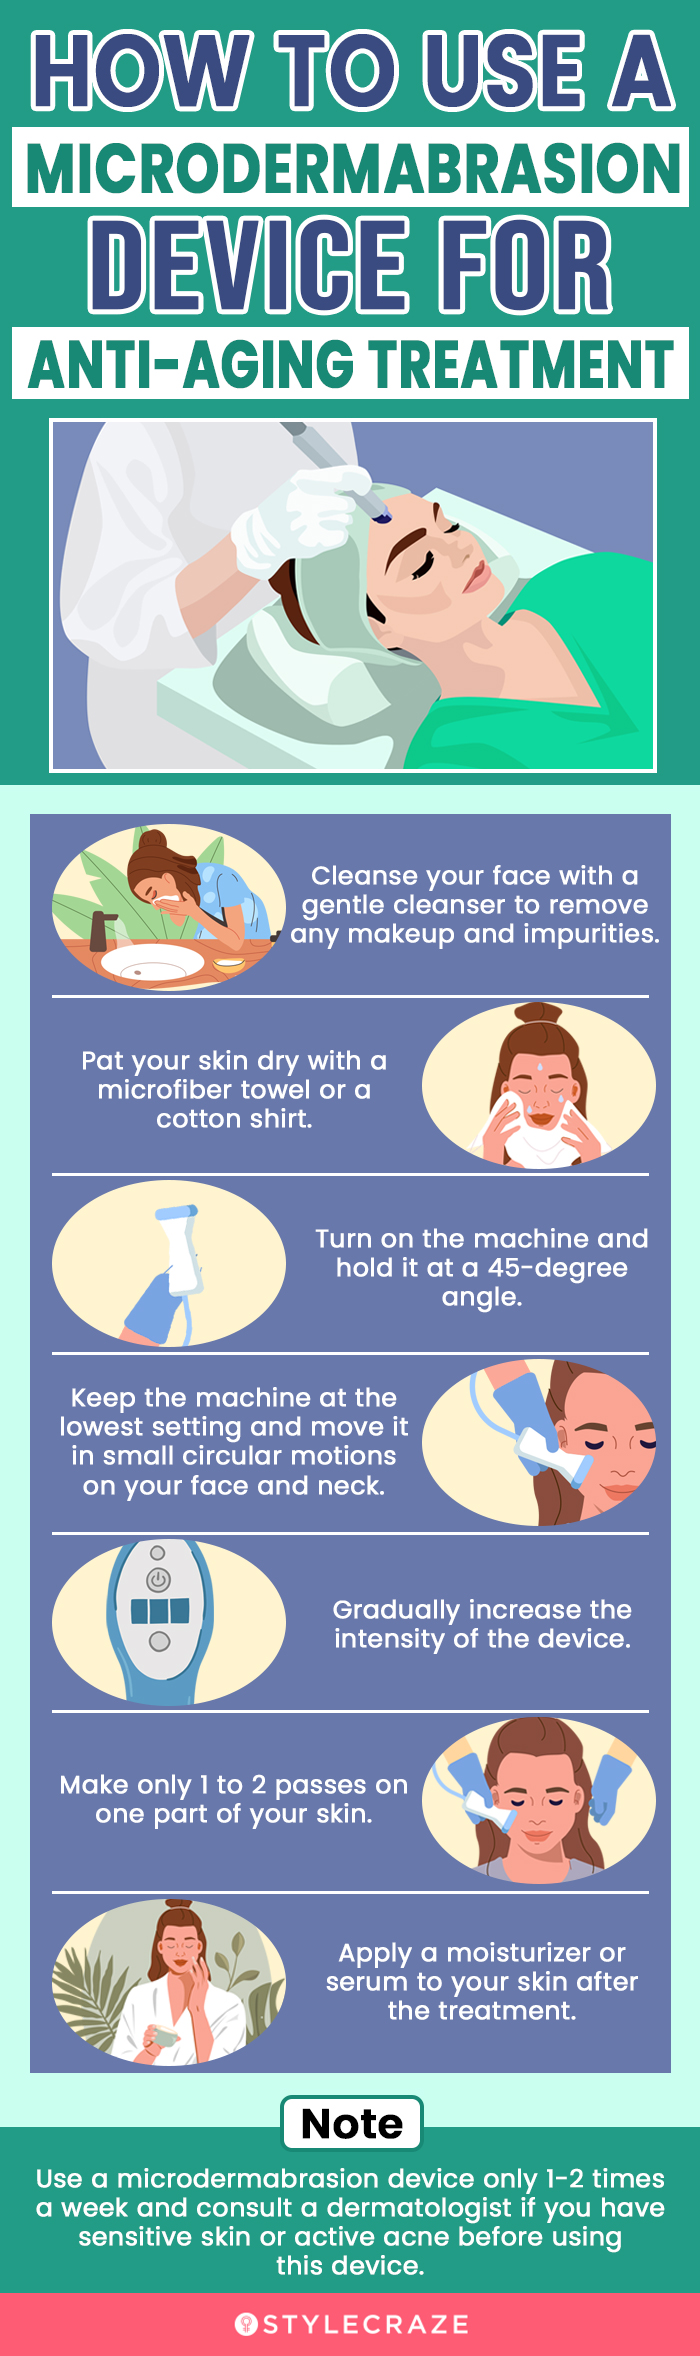 How To Use Microdermabrasion Device For Anti-Aging Treatment (infographic)